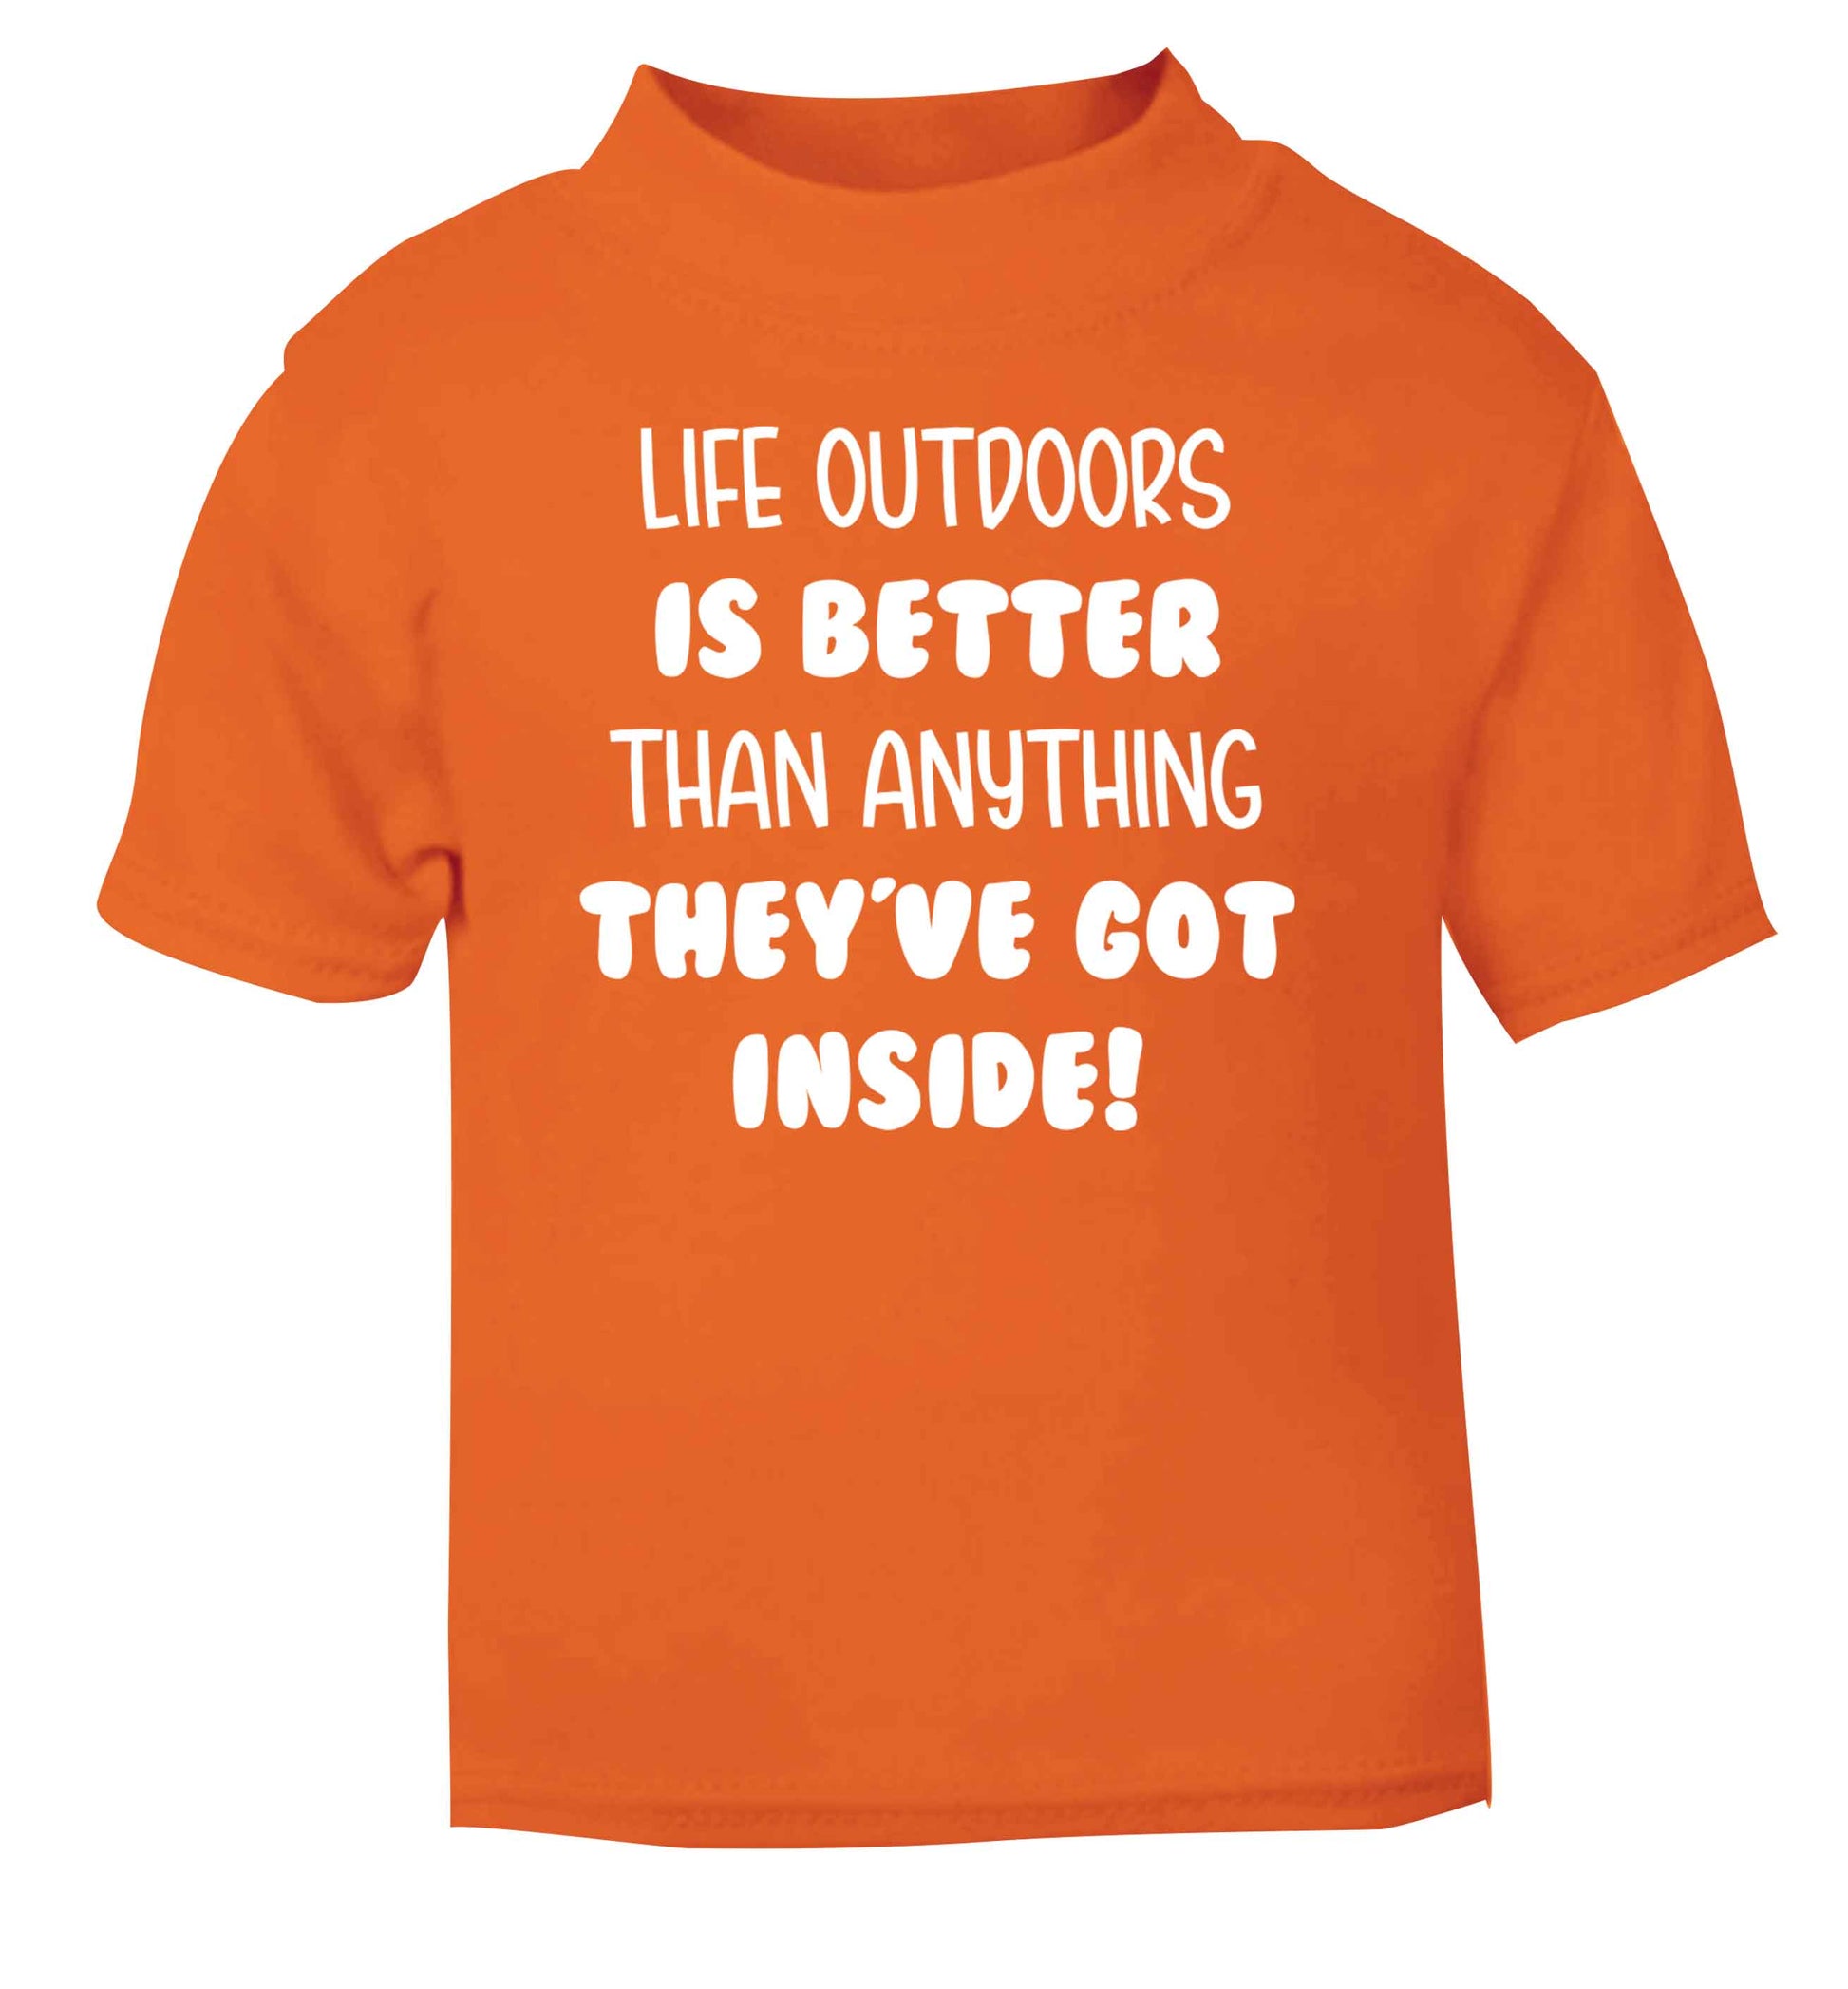 Life outdoors is better than anything they've go inside orange Baby Toddler Tshirt 2 Years